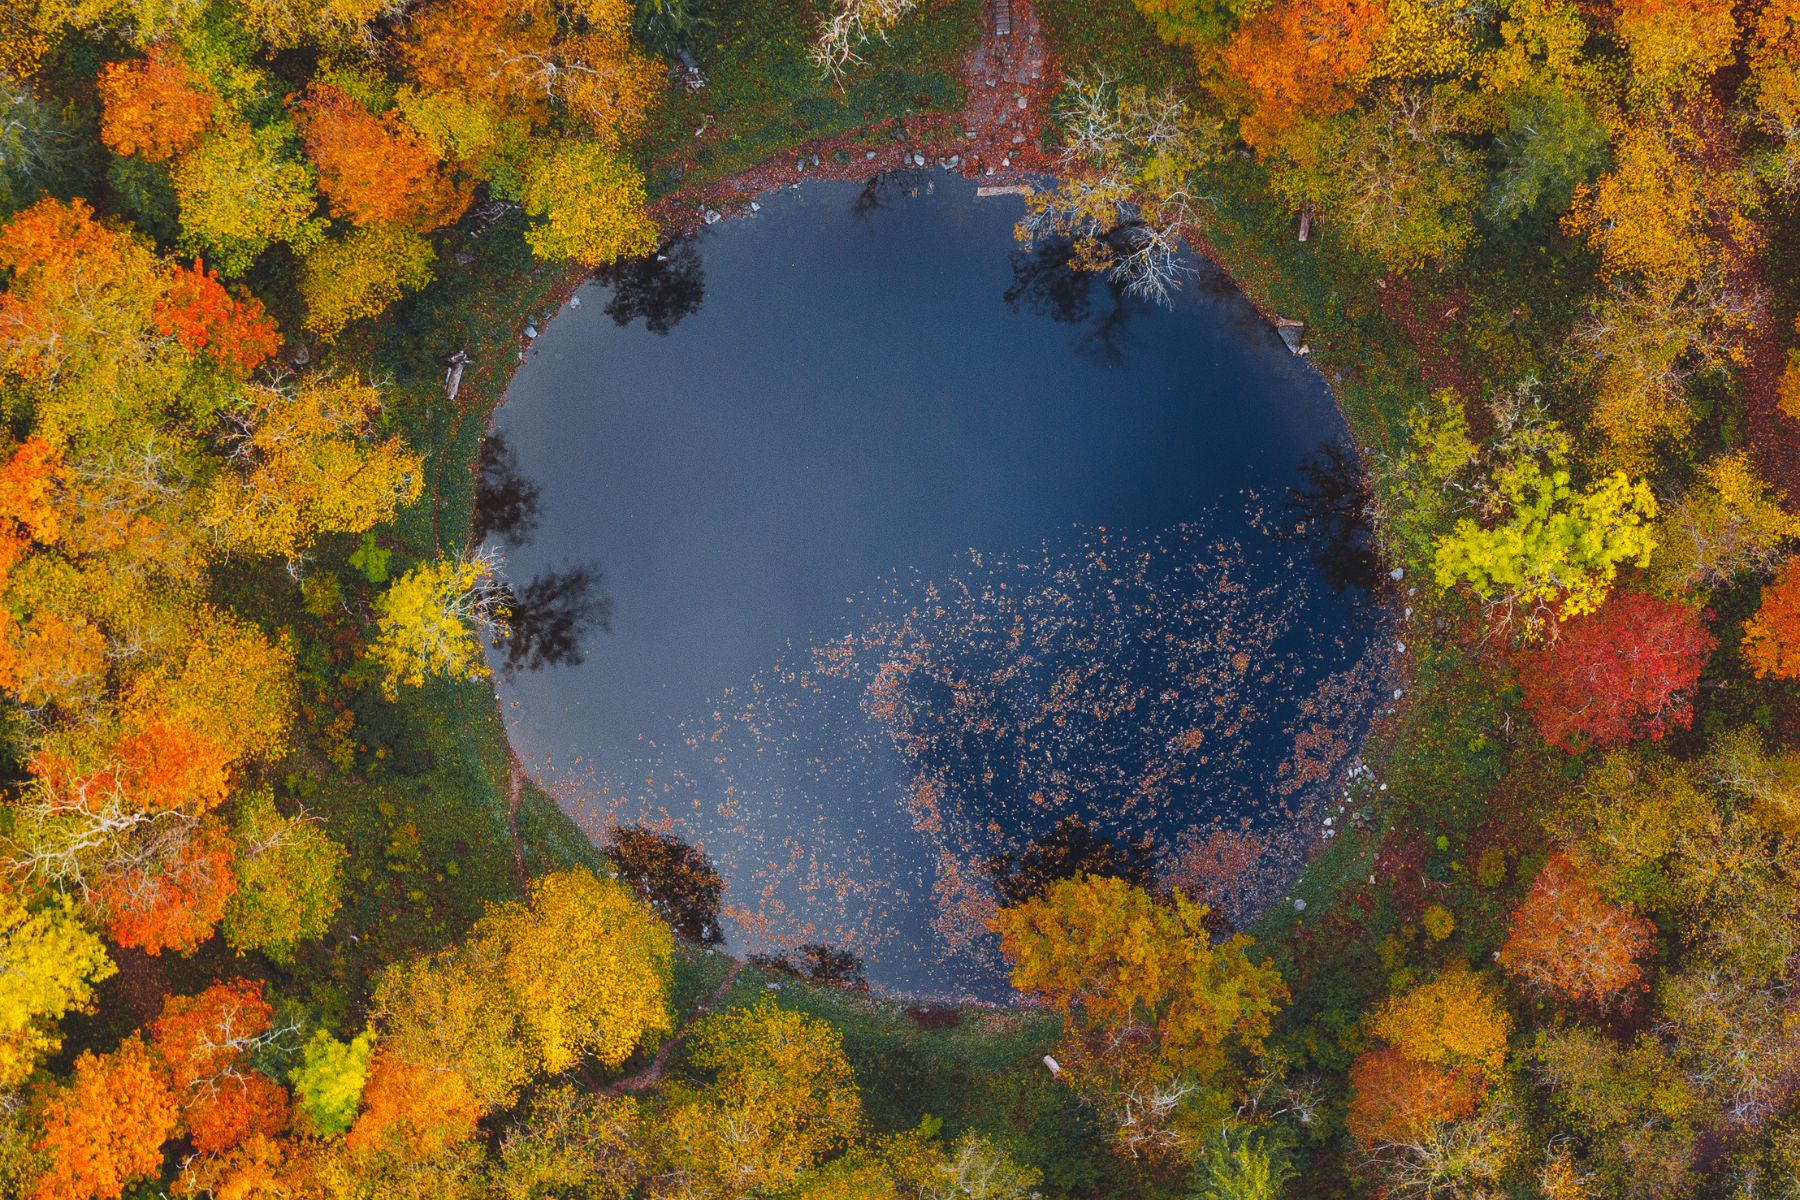 The Kaali Crater Lake in Estonia seen from above